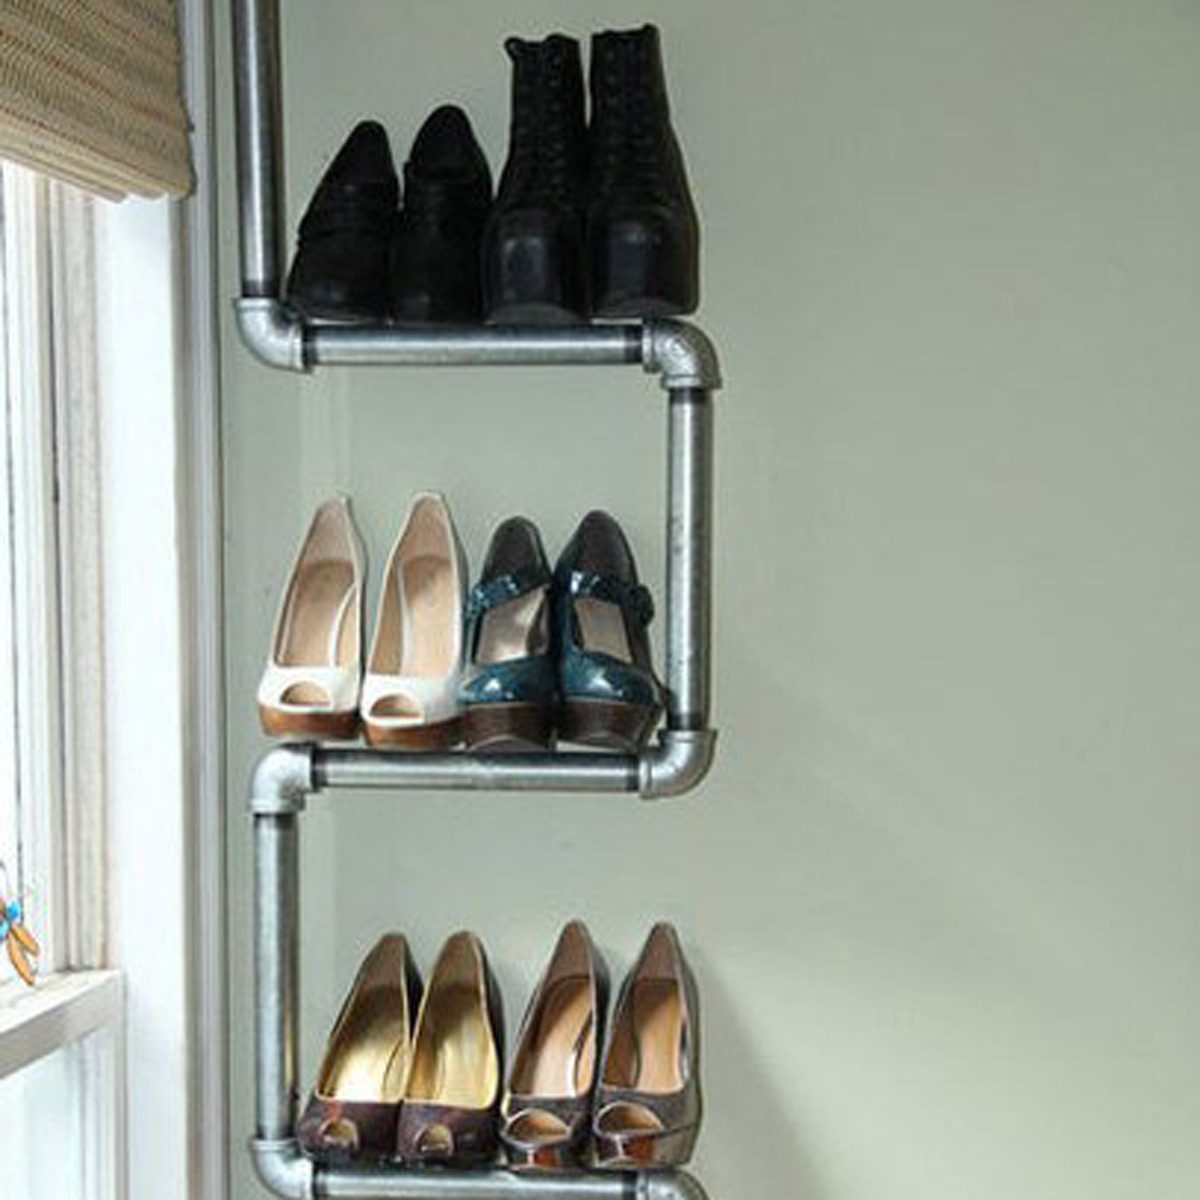 Shoe rack in entry nook : r/woodworking